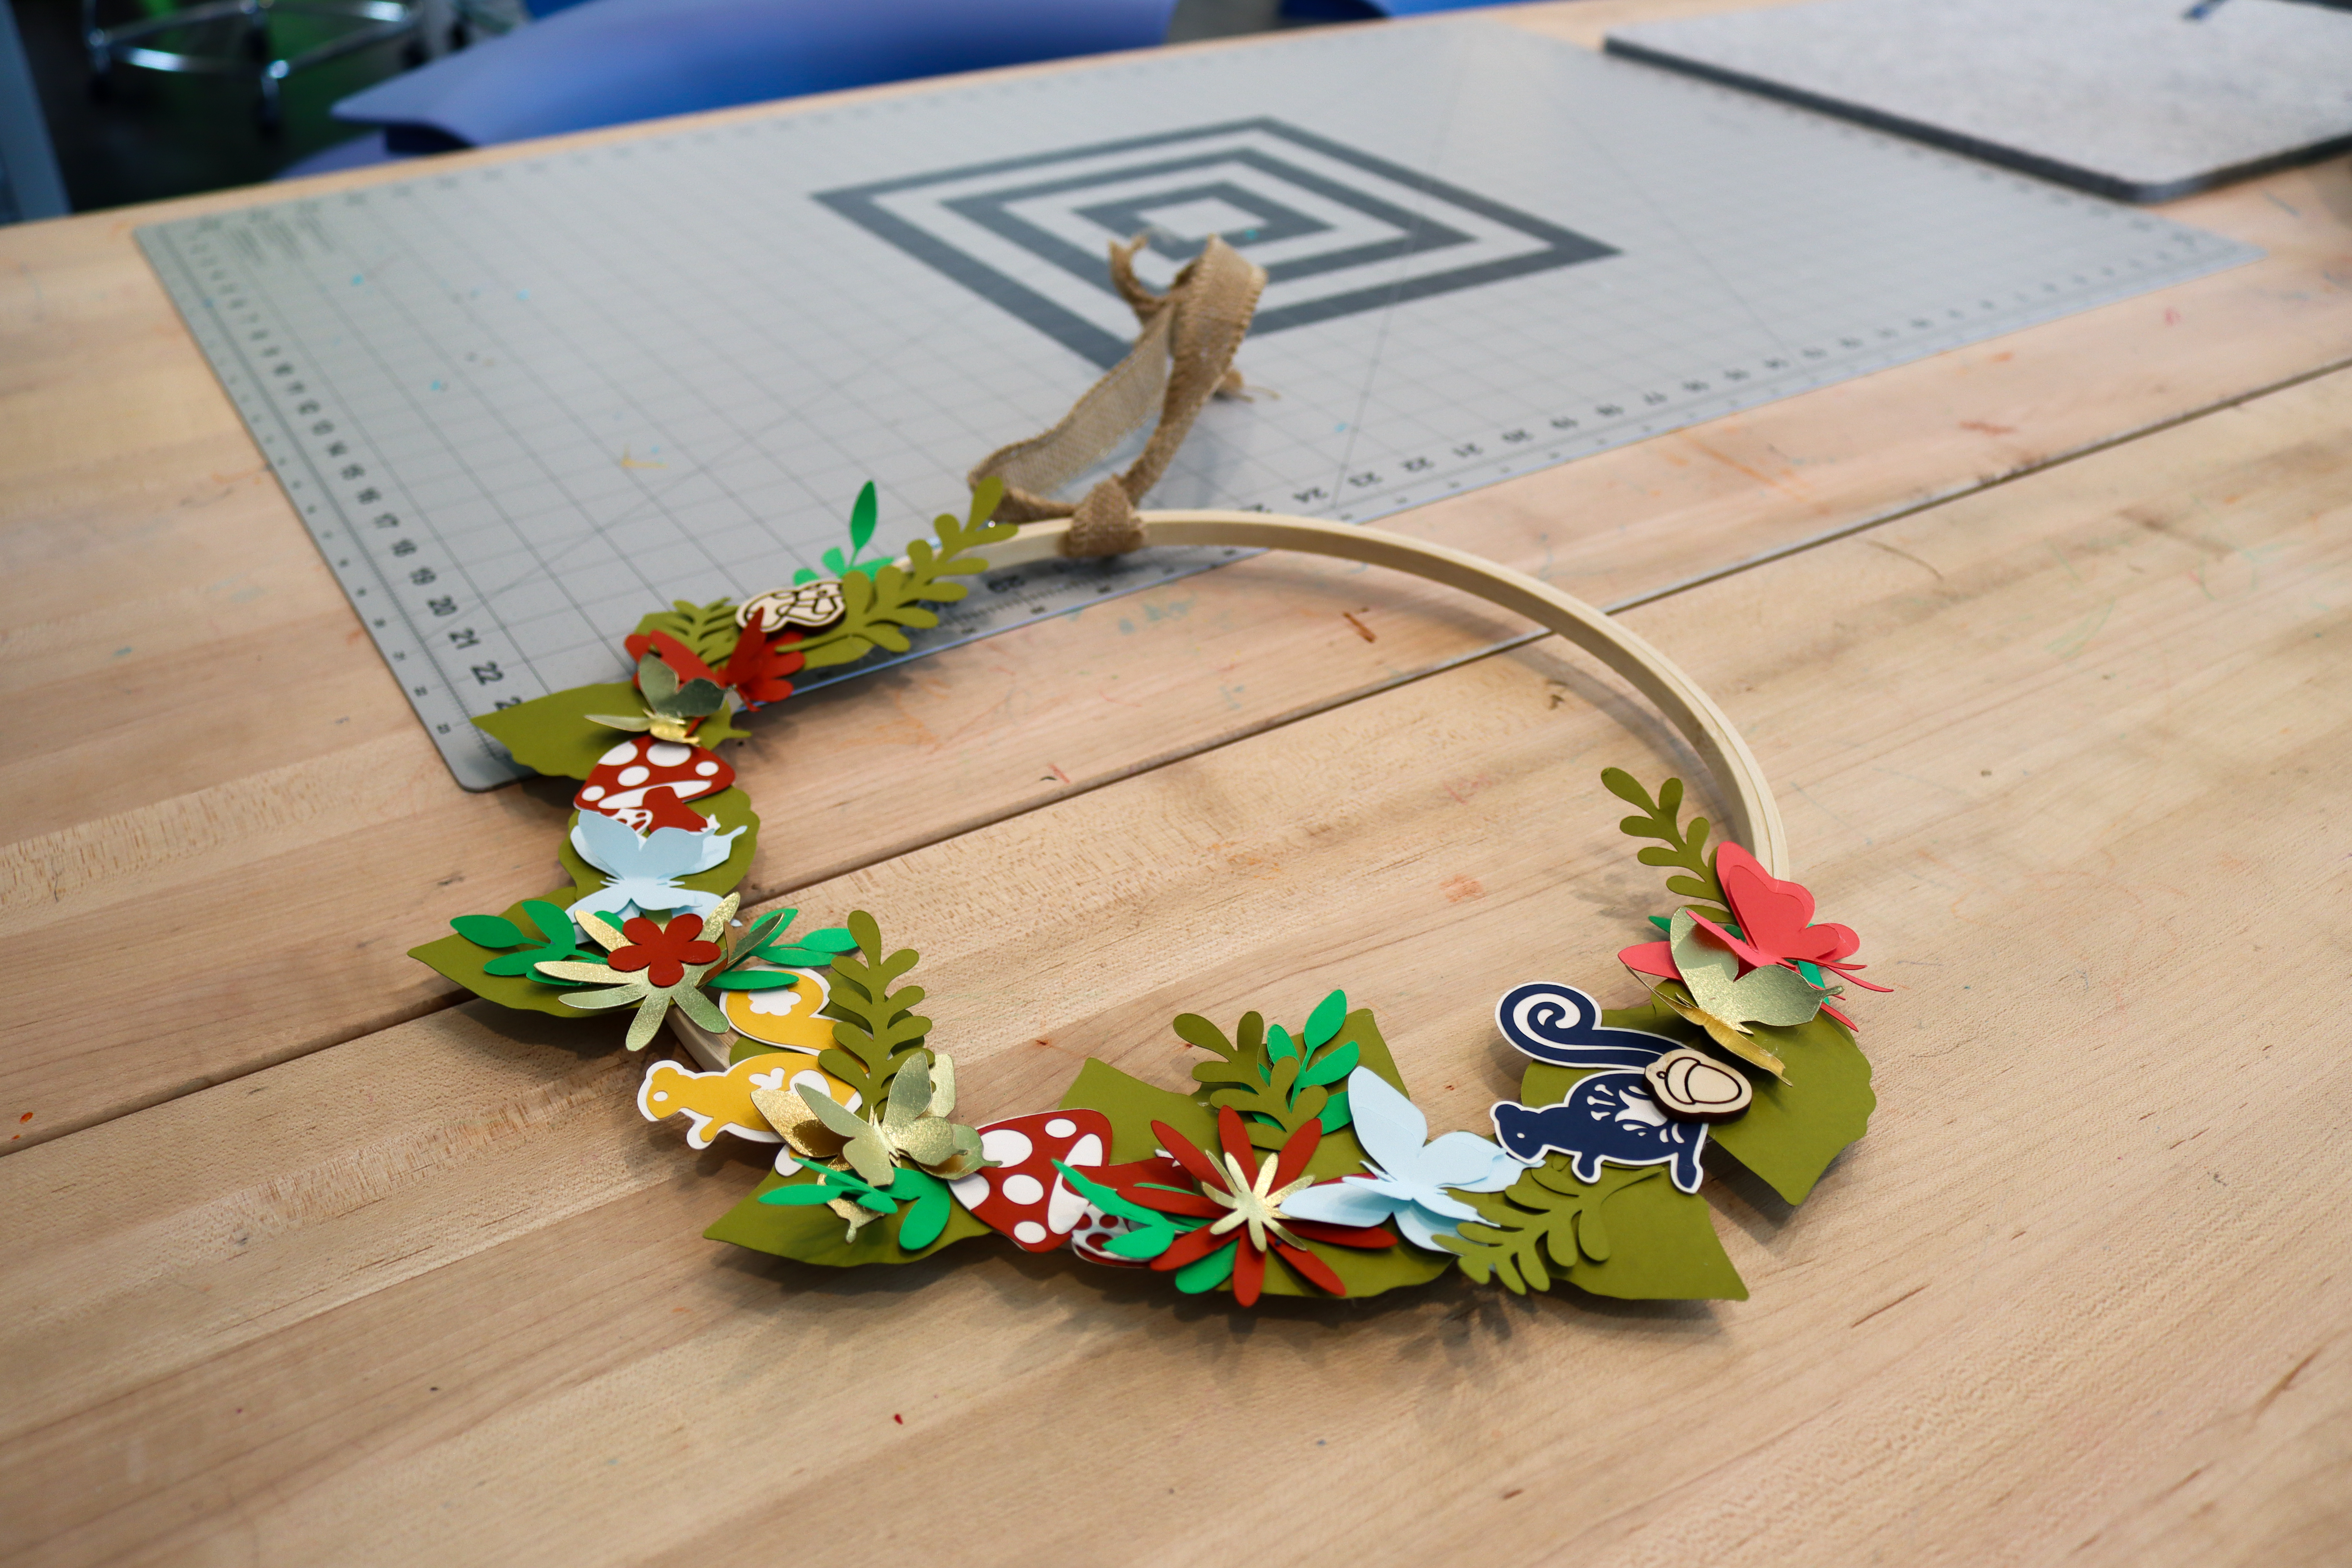 Wreath on a table in Studio 411 made from an embroidery hoop and paper cut-out shapes of leaves, butterflies, mushrooms, and squirrels.